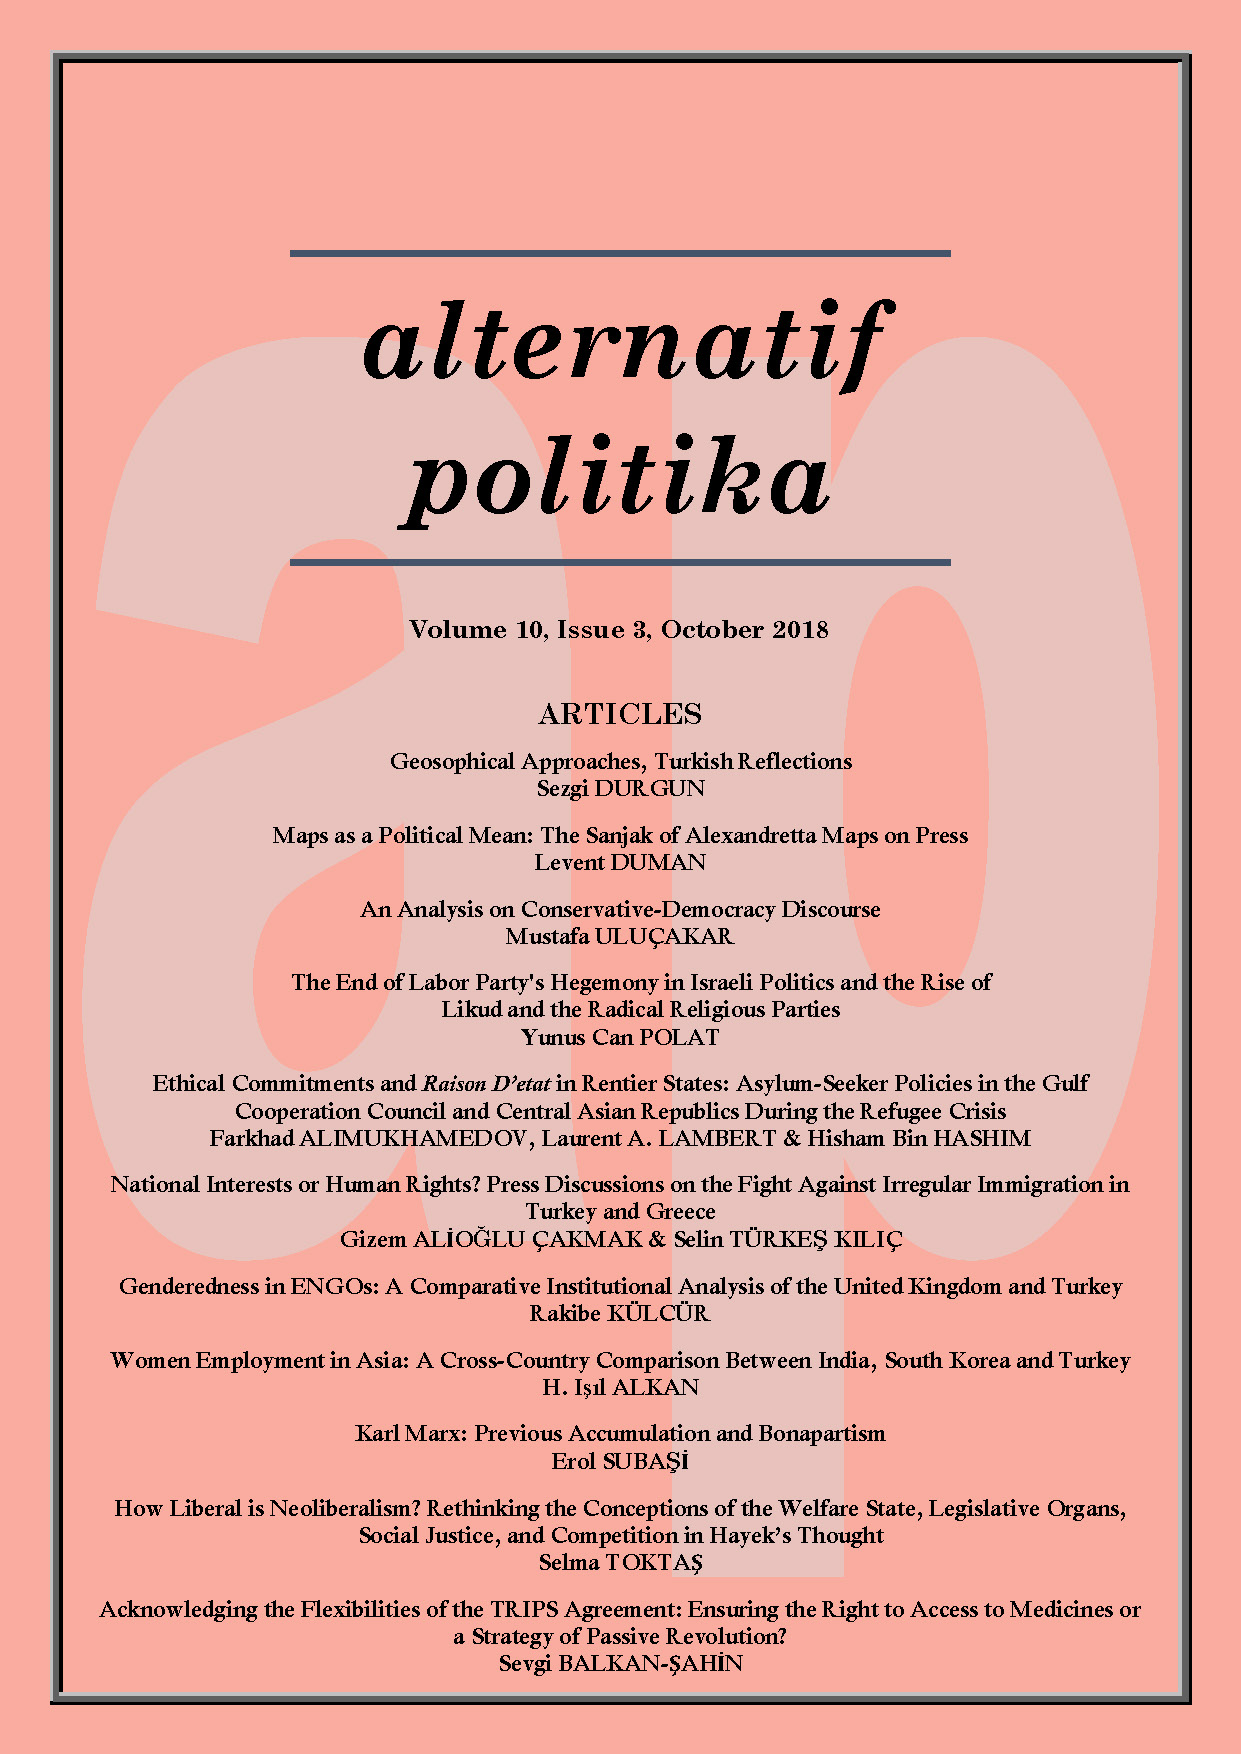 MAPS AS A POLITICAL MEAN: THE SANJAK OF ALEXANDRETTA MAPS ON PRESS Cover Image